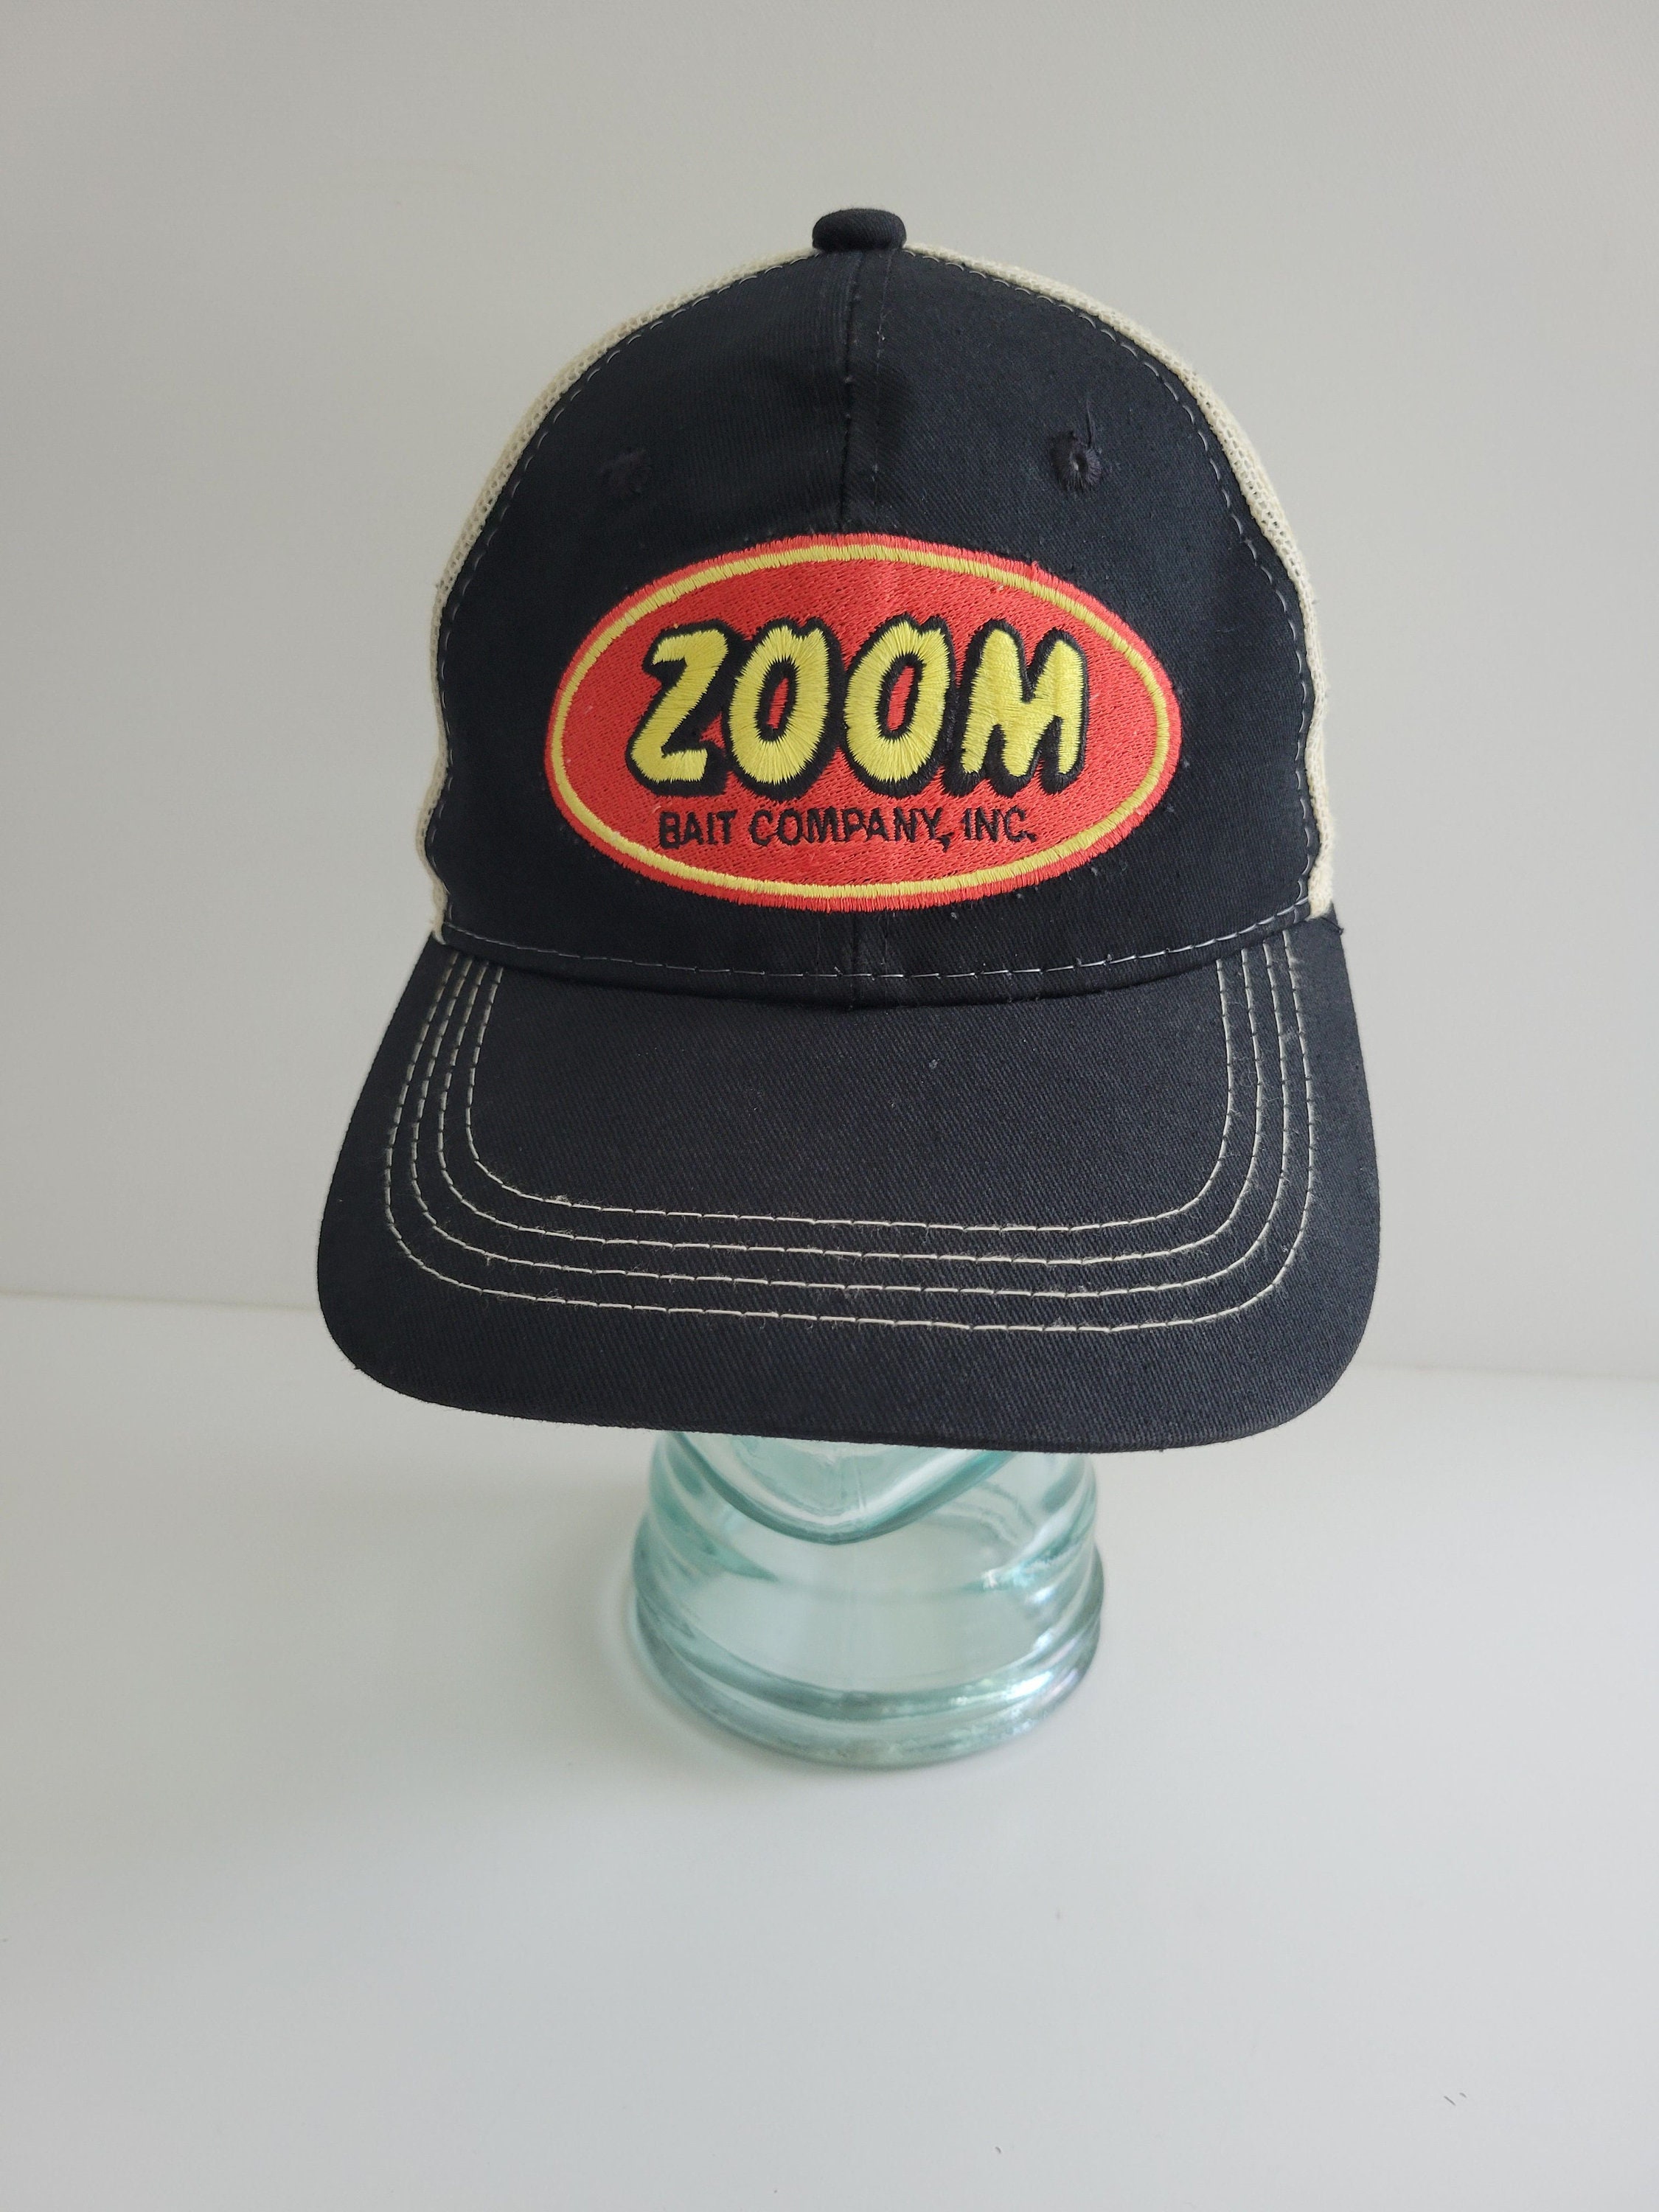 NOS Zoom Bait Company Mesh Back Black and Cream Hat 